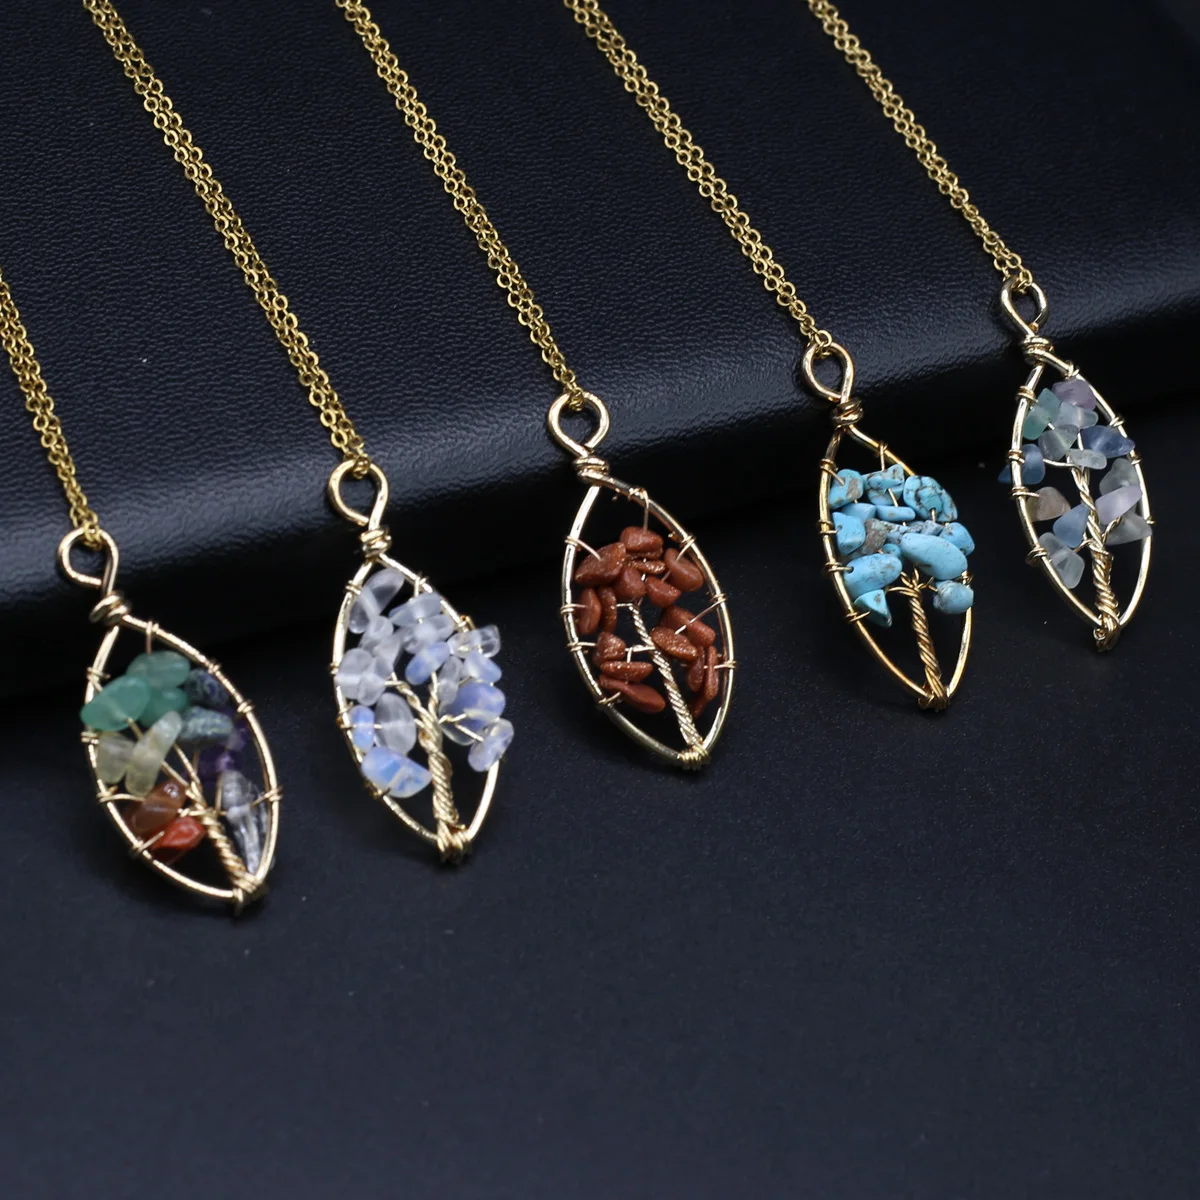 

Tree Of Life Link Chains Gemstone Gravel Winding Crystals Charms Necklaces Natural Stone Pendant Necklace For Women Jewelry